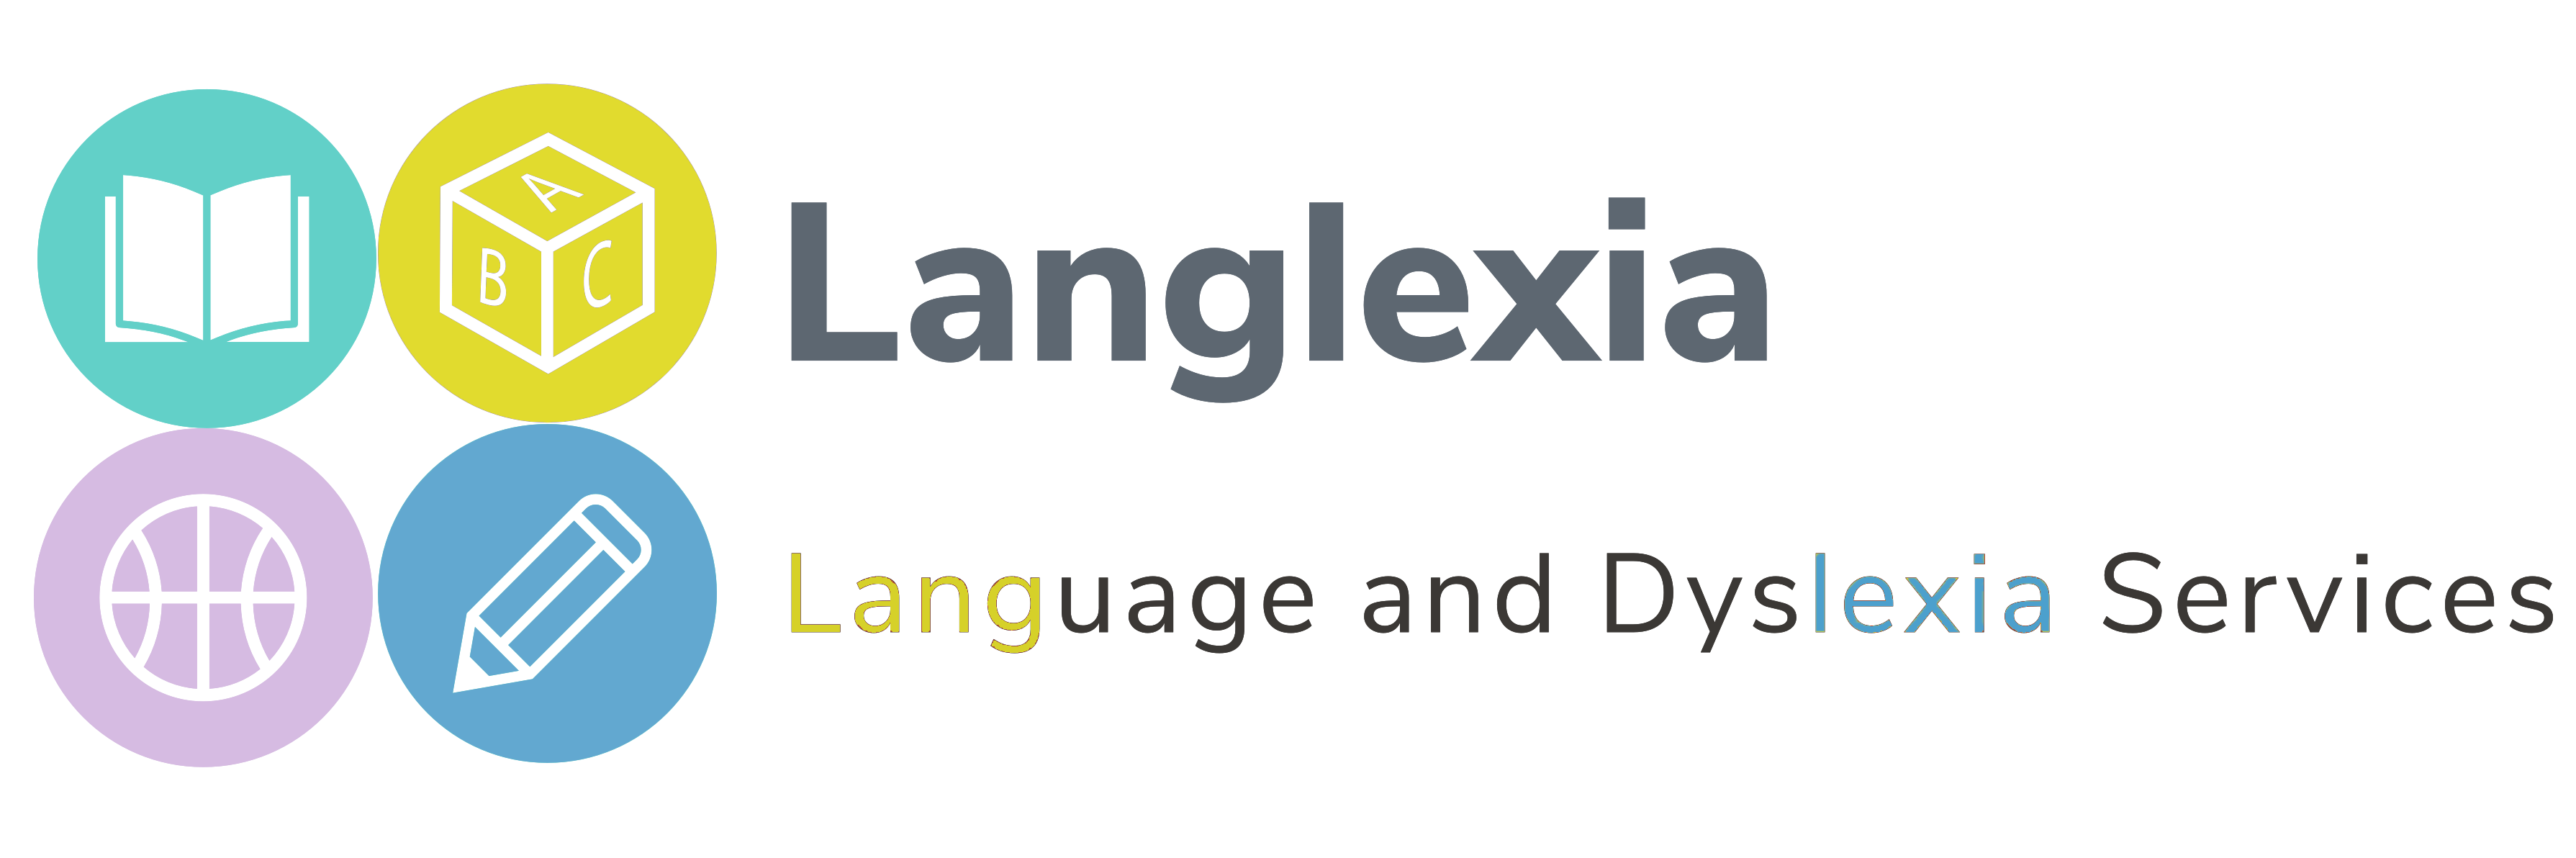 speech and language therapy, dyslexia service, AAC service, speech therapy, child speech therapy,